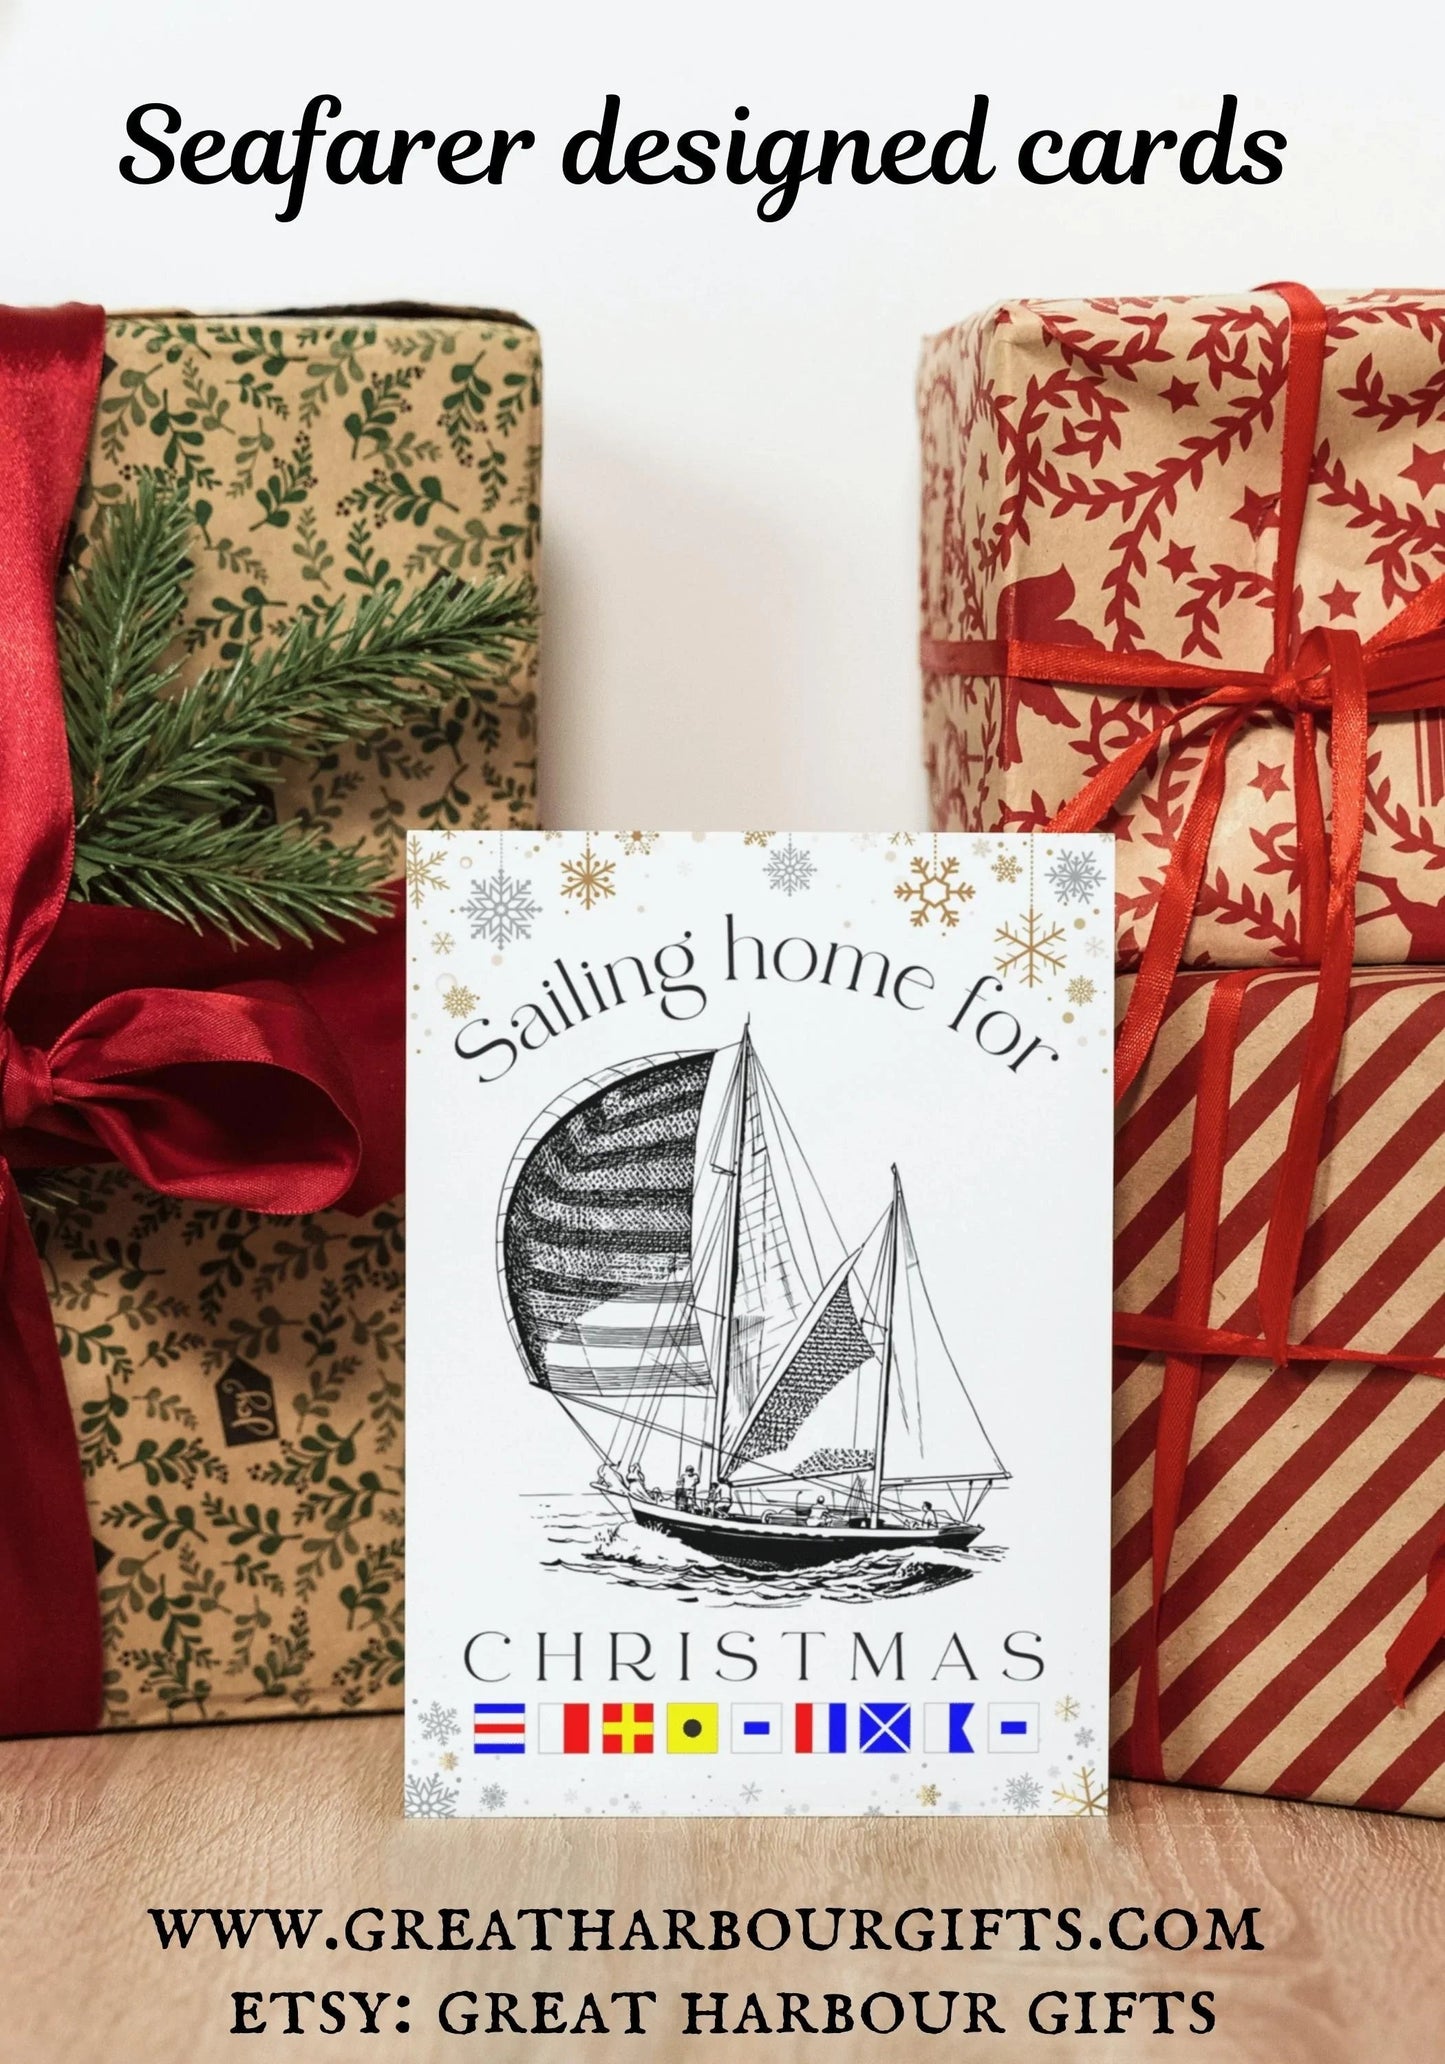 Nautical Christmas card, sailing home for Christmas. Great Harbour Gifts